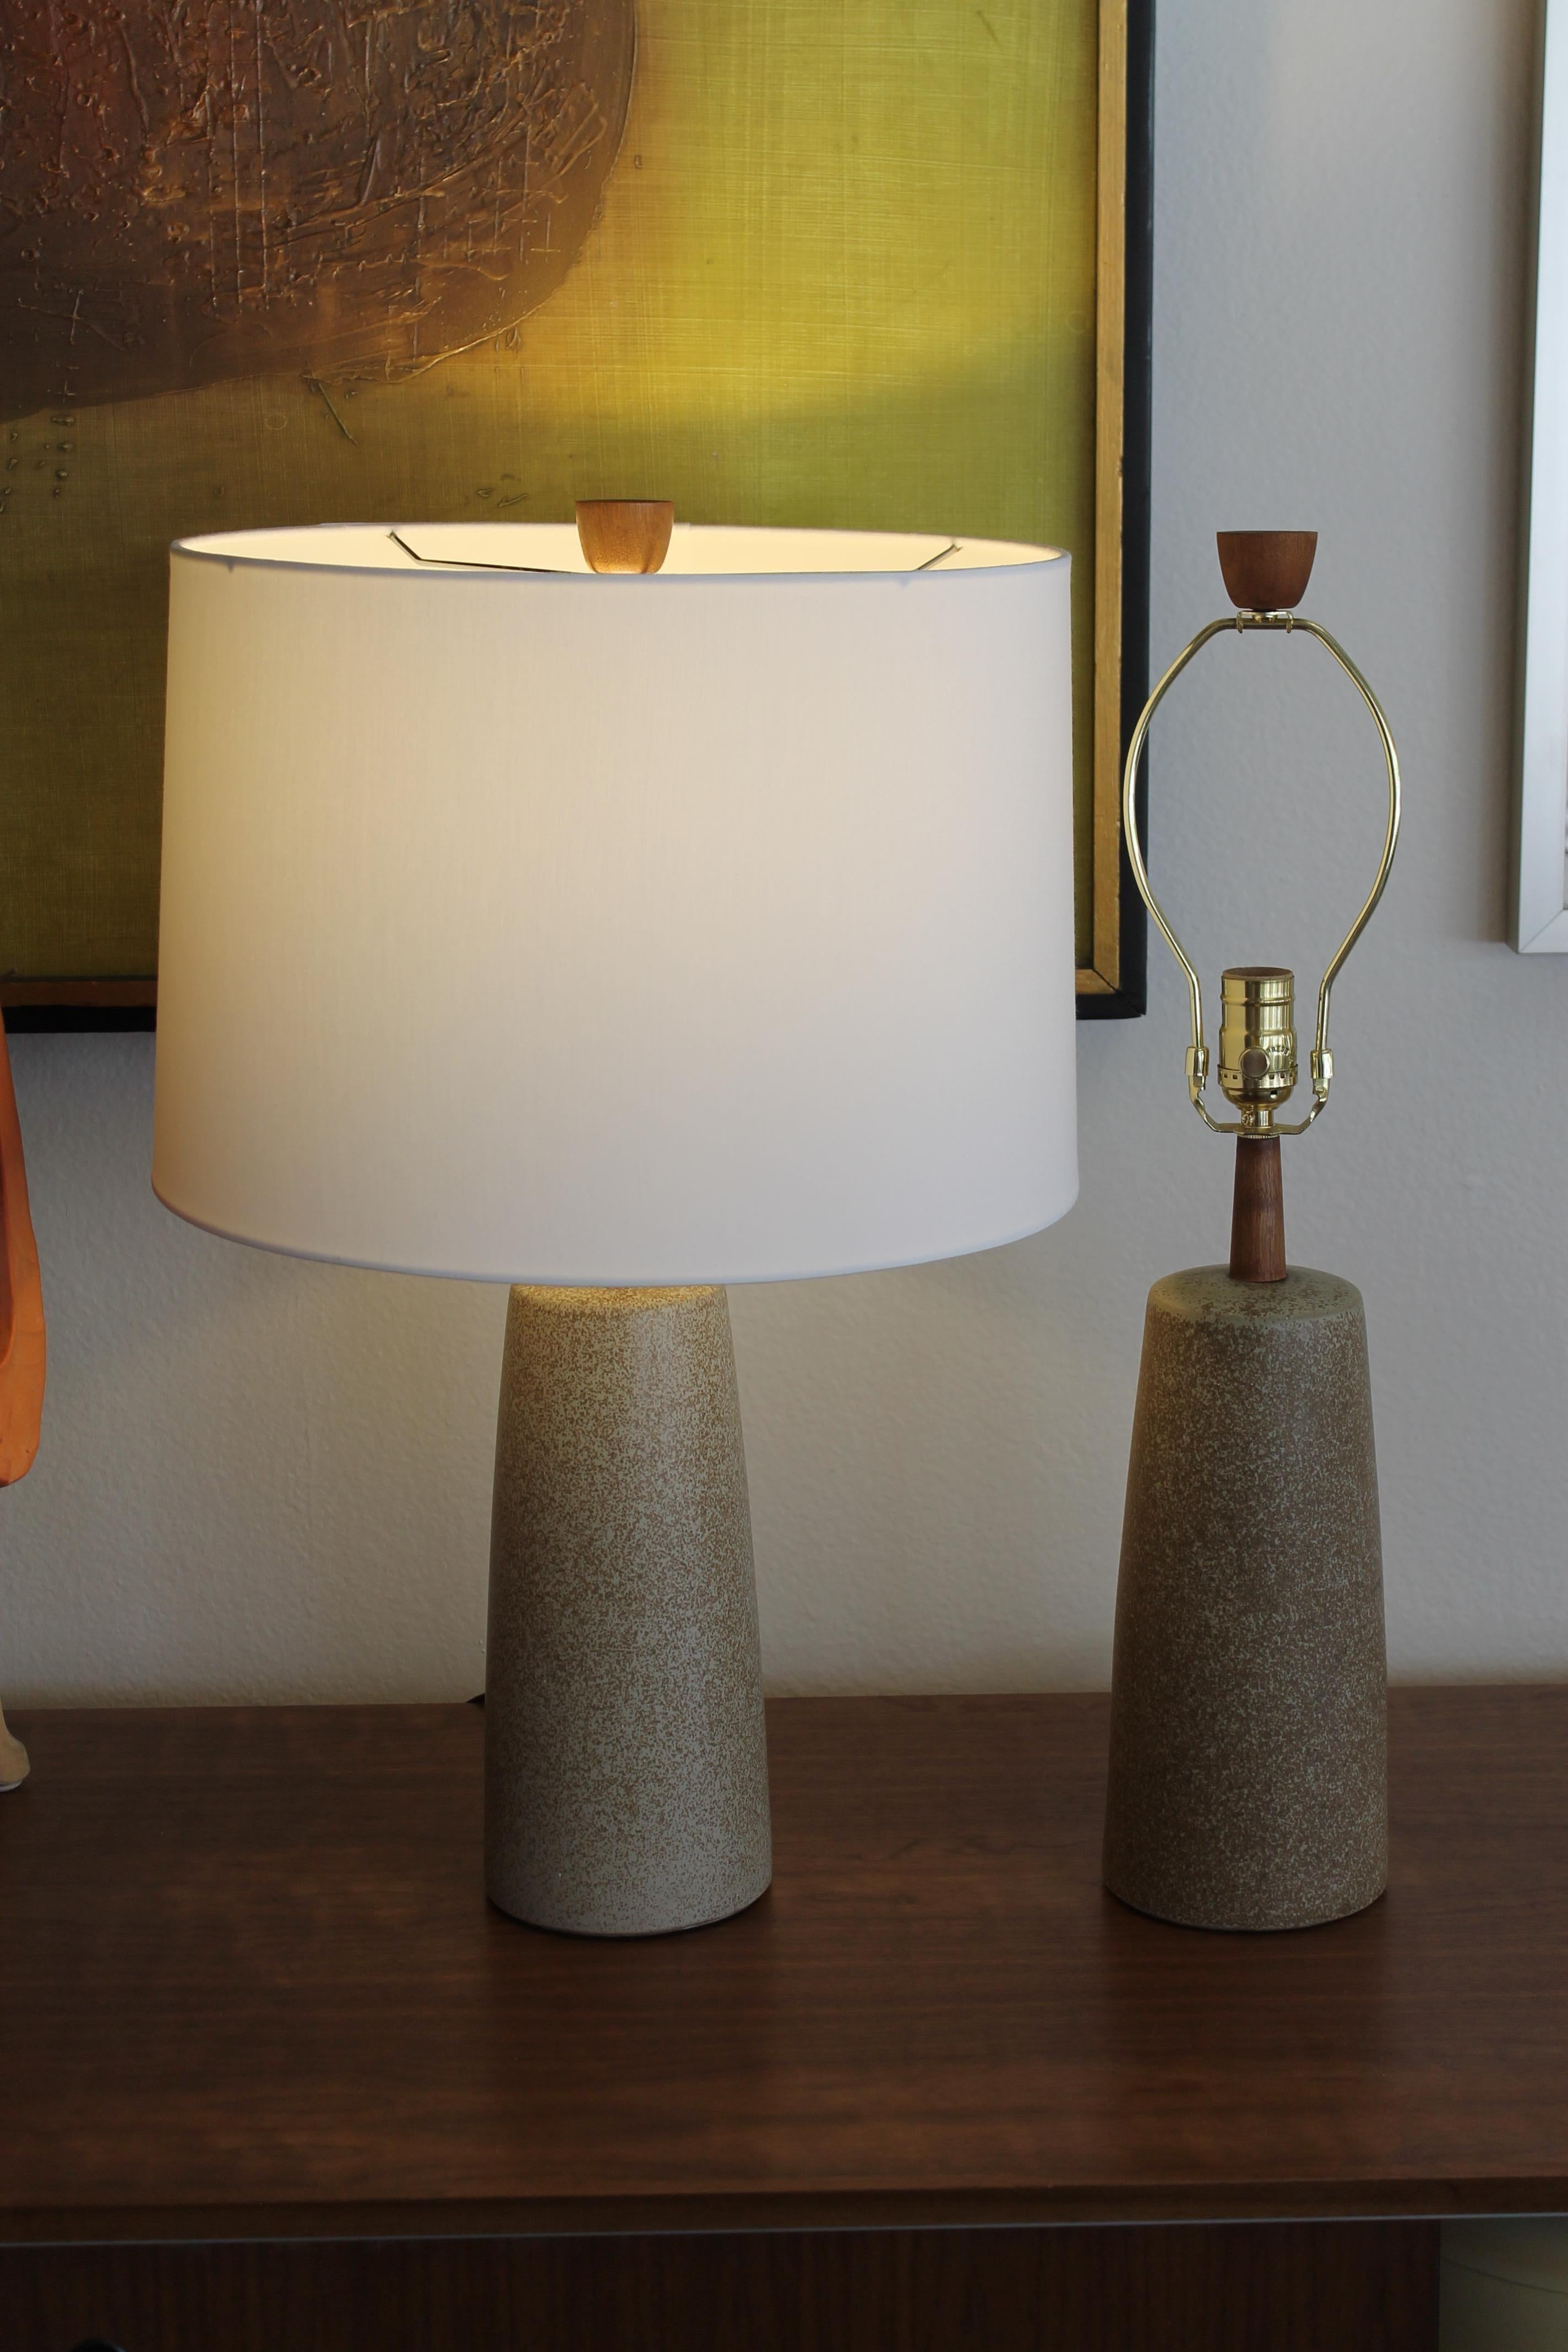 Martz table lamps by Marshall Studios, Inc. Veedersburg, Indiana. One lamp has a paper label in addition to the engraved Martz signature near the cord outlets. Lamps have the original finial and have been professionally rewired for a 3 way light